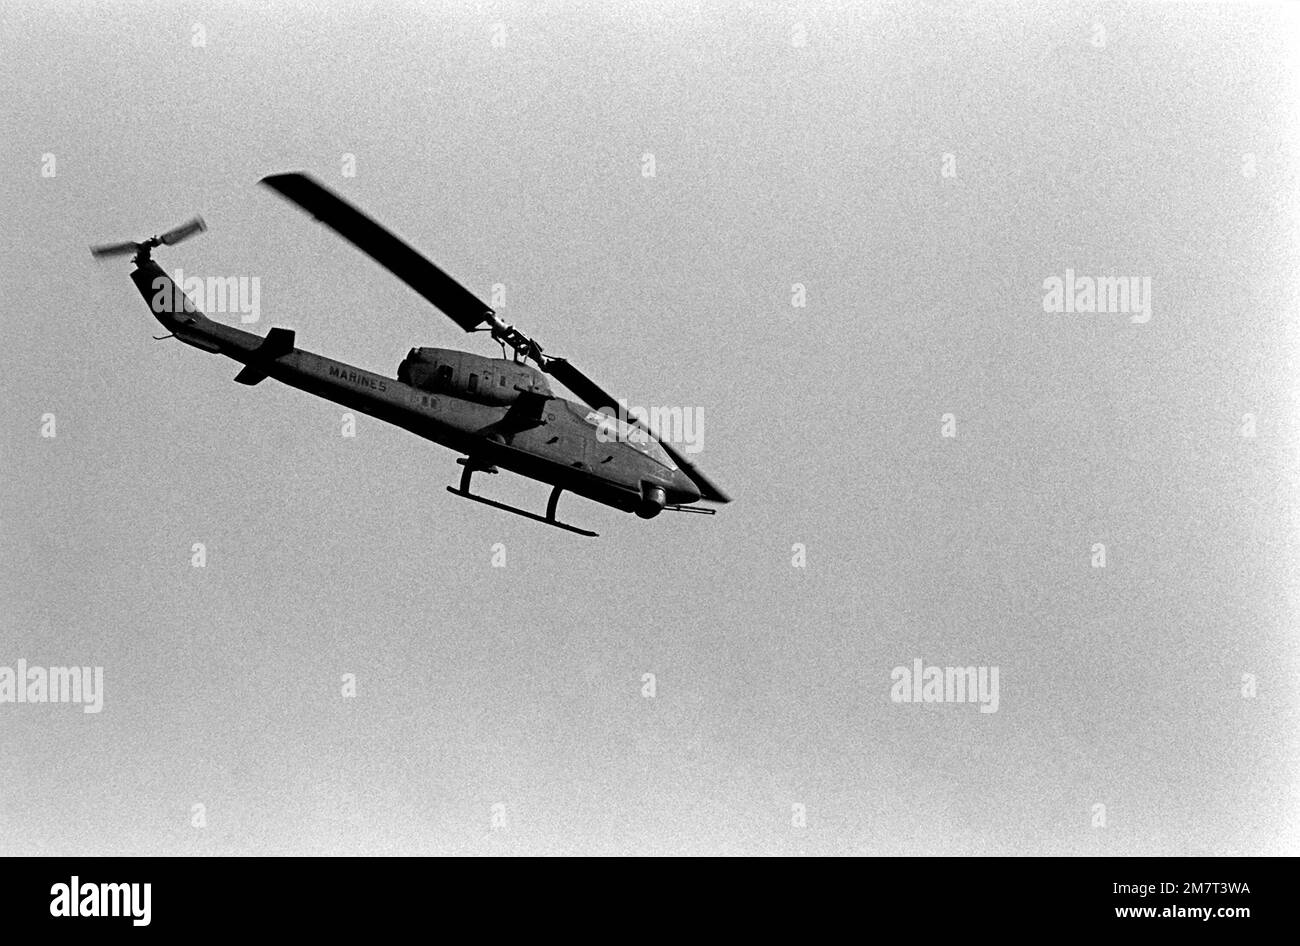 An air-to-air right side view of an AH-1 Sea Cobra helicopter during the NATO exercise Display Determination '81. Subject Operation/Series: DISPLAY DETERMINATION '81 Base: Doganbey Country: Turkey (TUR) Stock Photo